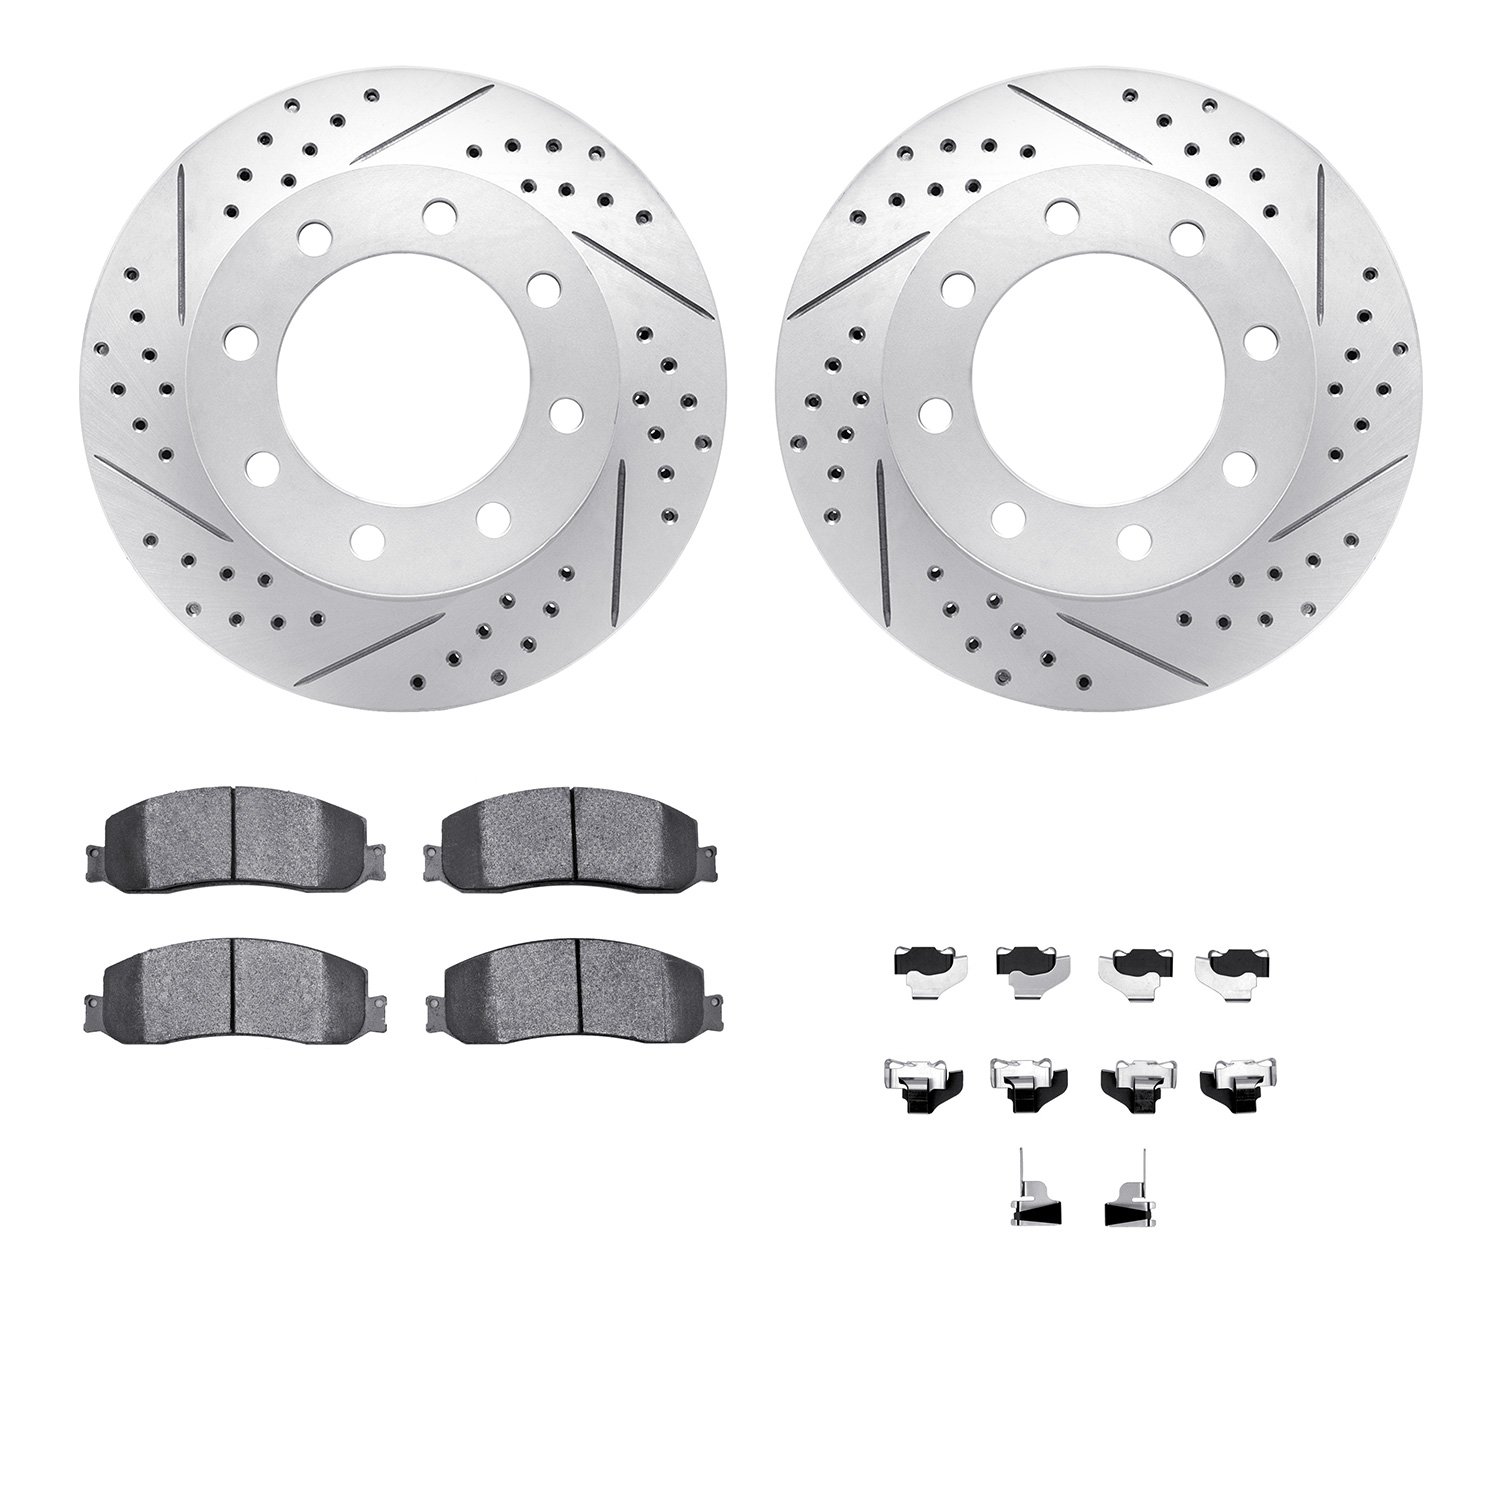 2212-99153 Geoperformance Drilled/Slotted Rotors w/Heavy-Duty Pads Kit & Hardware, 2010-2012 Ford/Lincoln/Mercury/Mazda, Positio